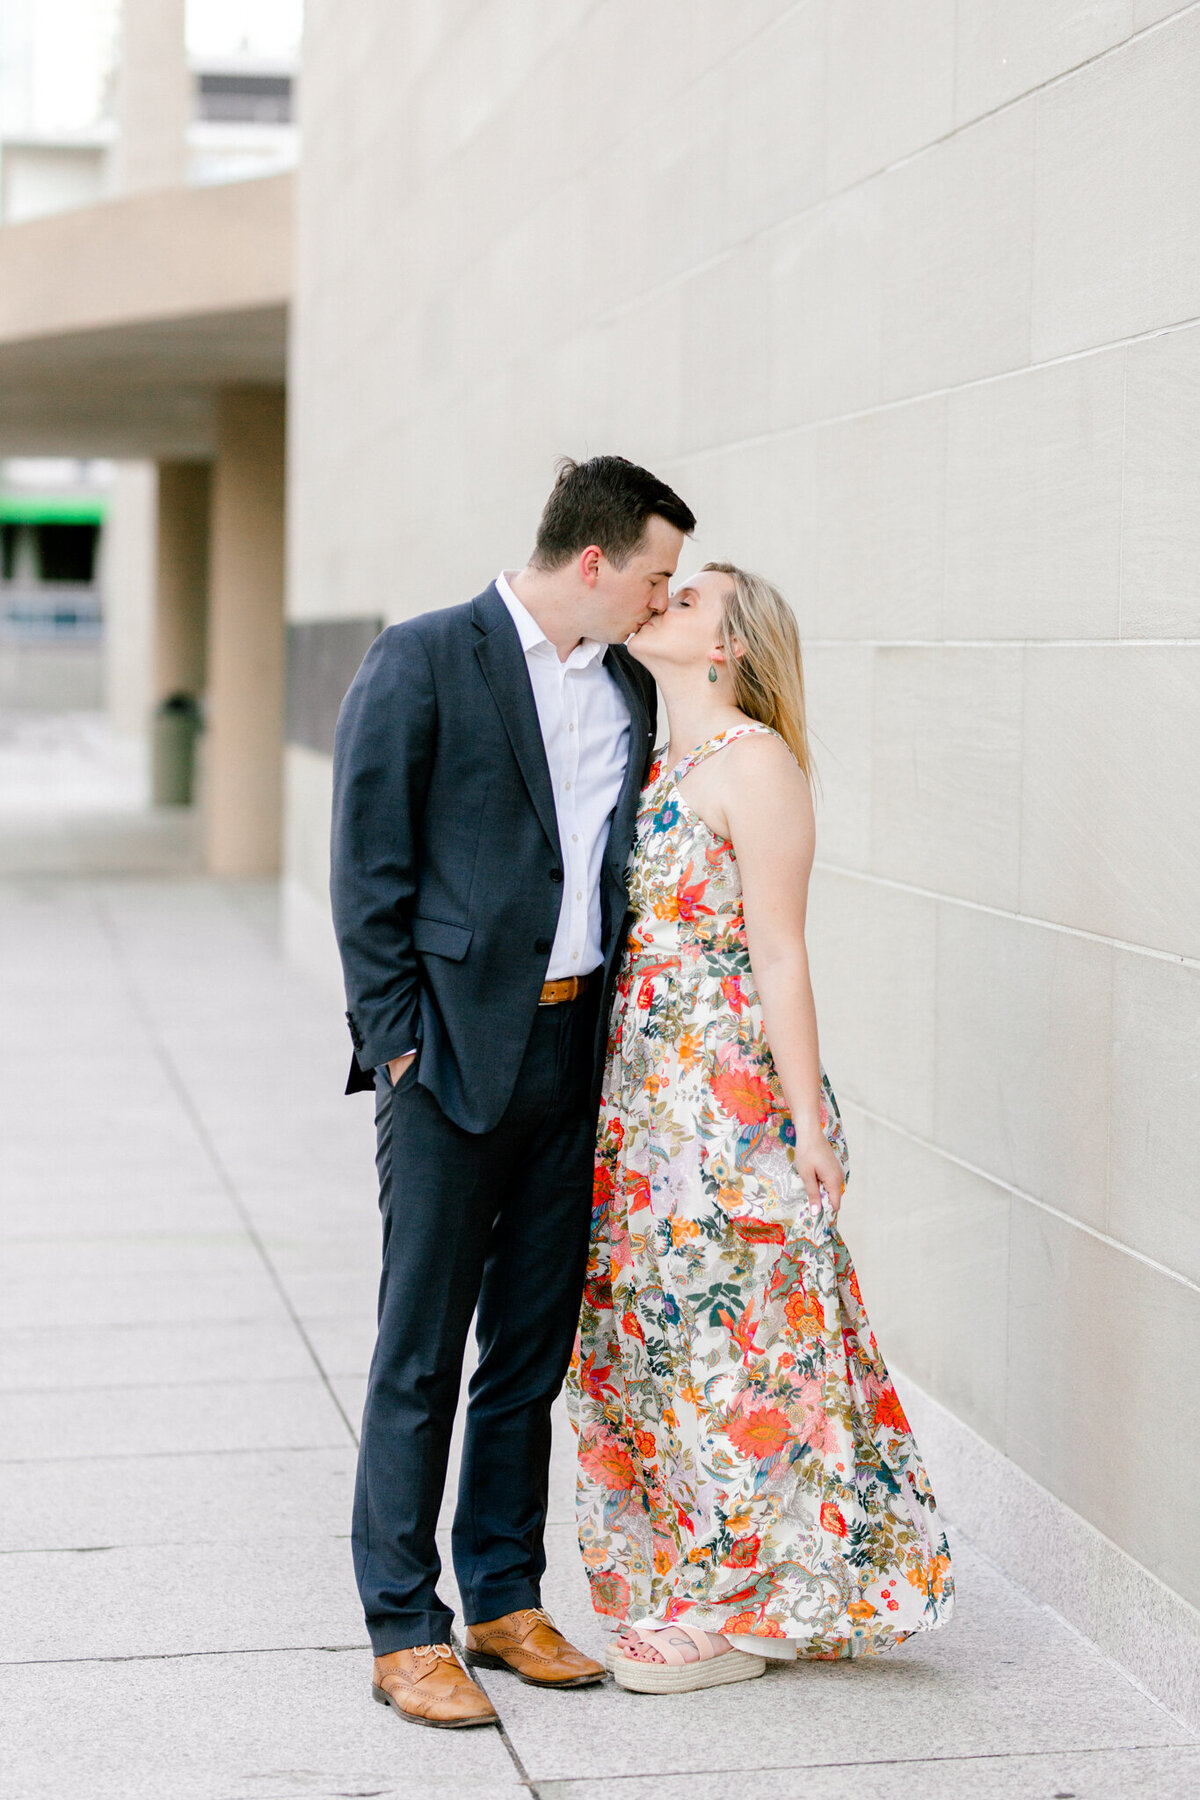 Montanna & KC Engagement Session at the Dallas Arts District | DFW Wedding Photographer | Sami Kathryn Photography-4